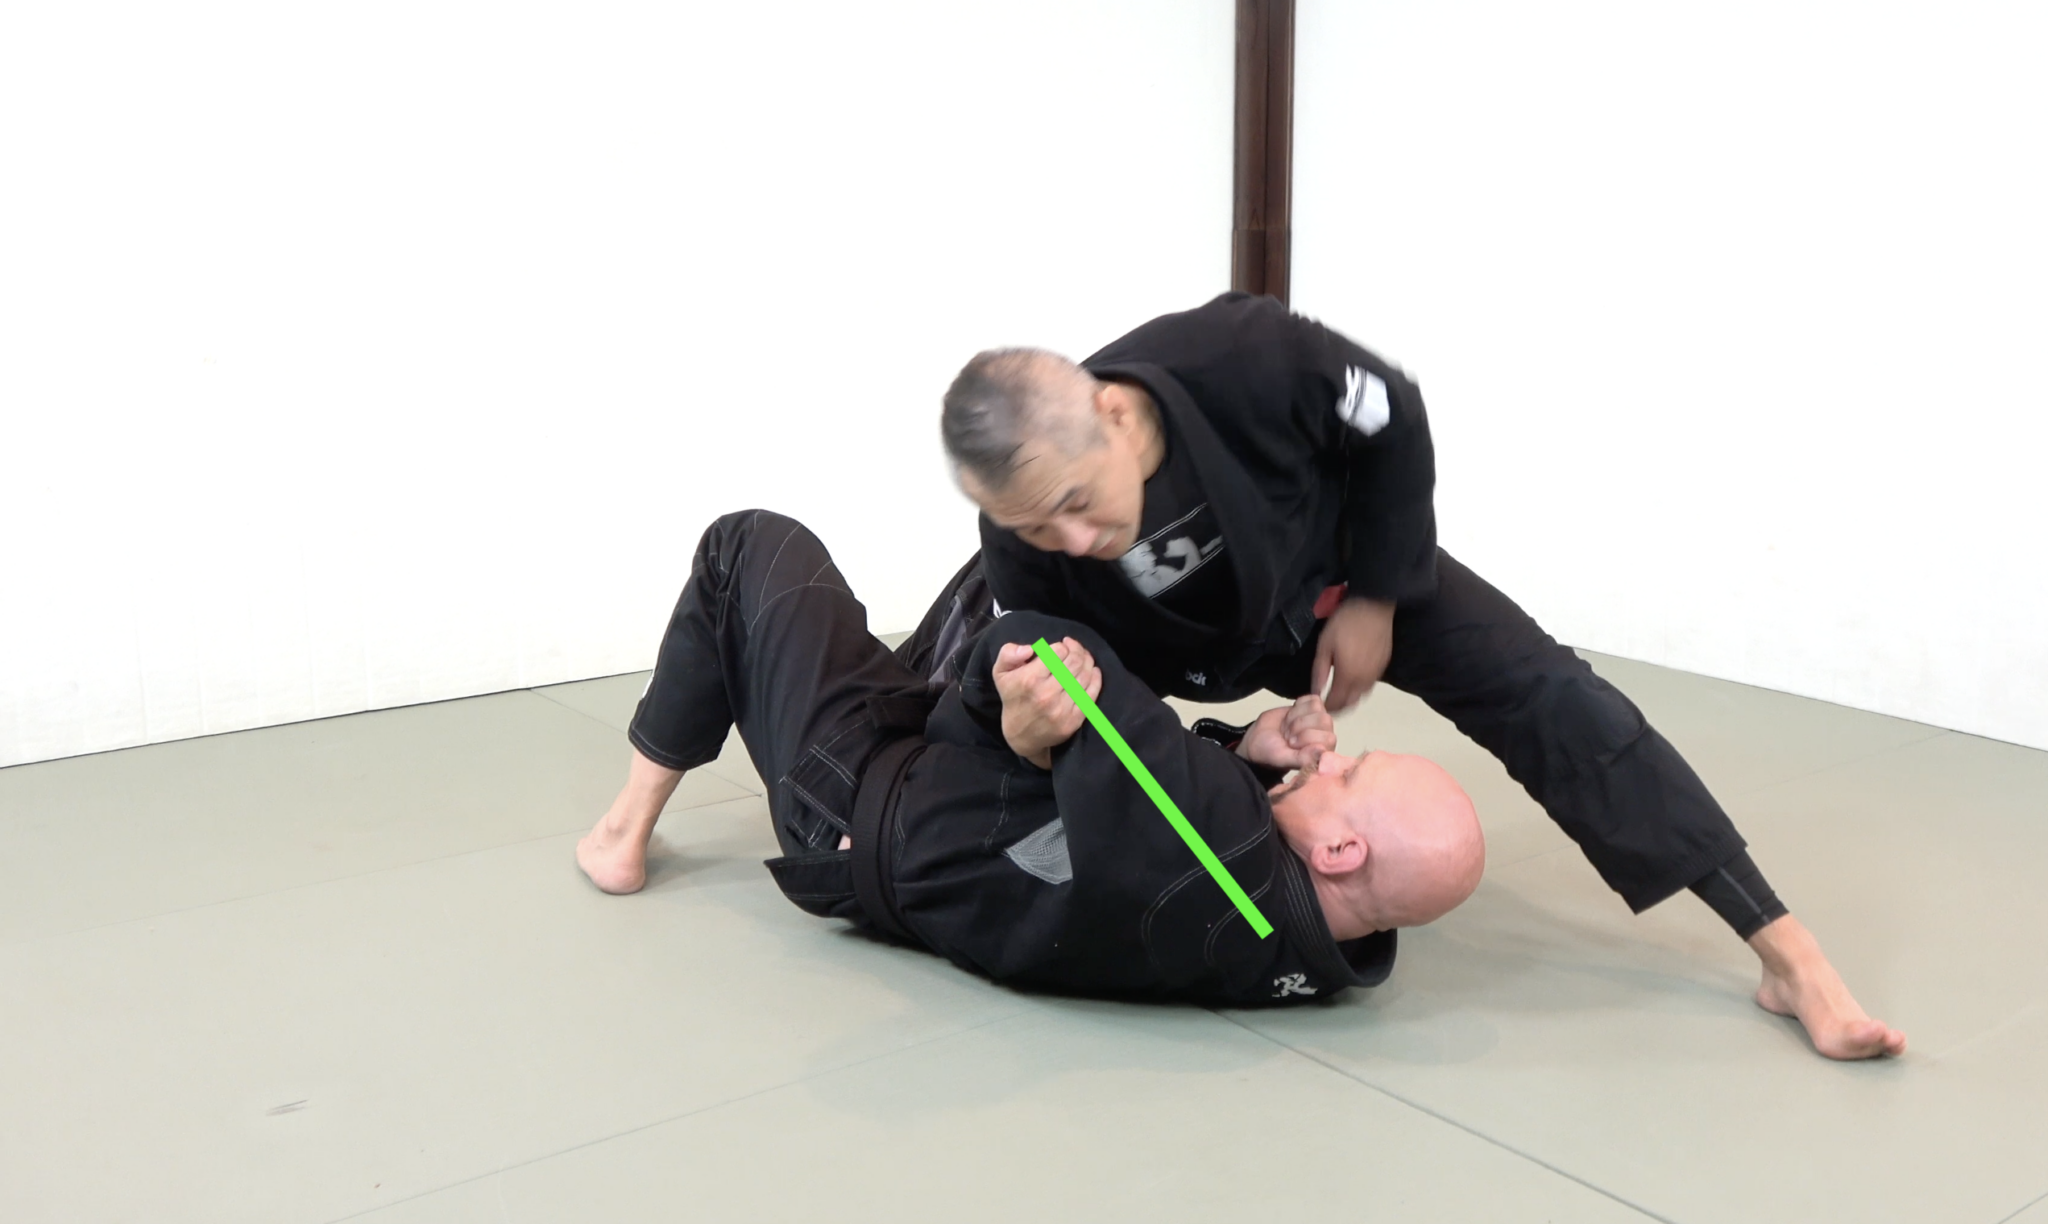 Knee On Belly Armbar BJJ Technique